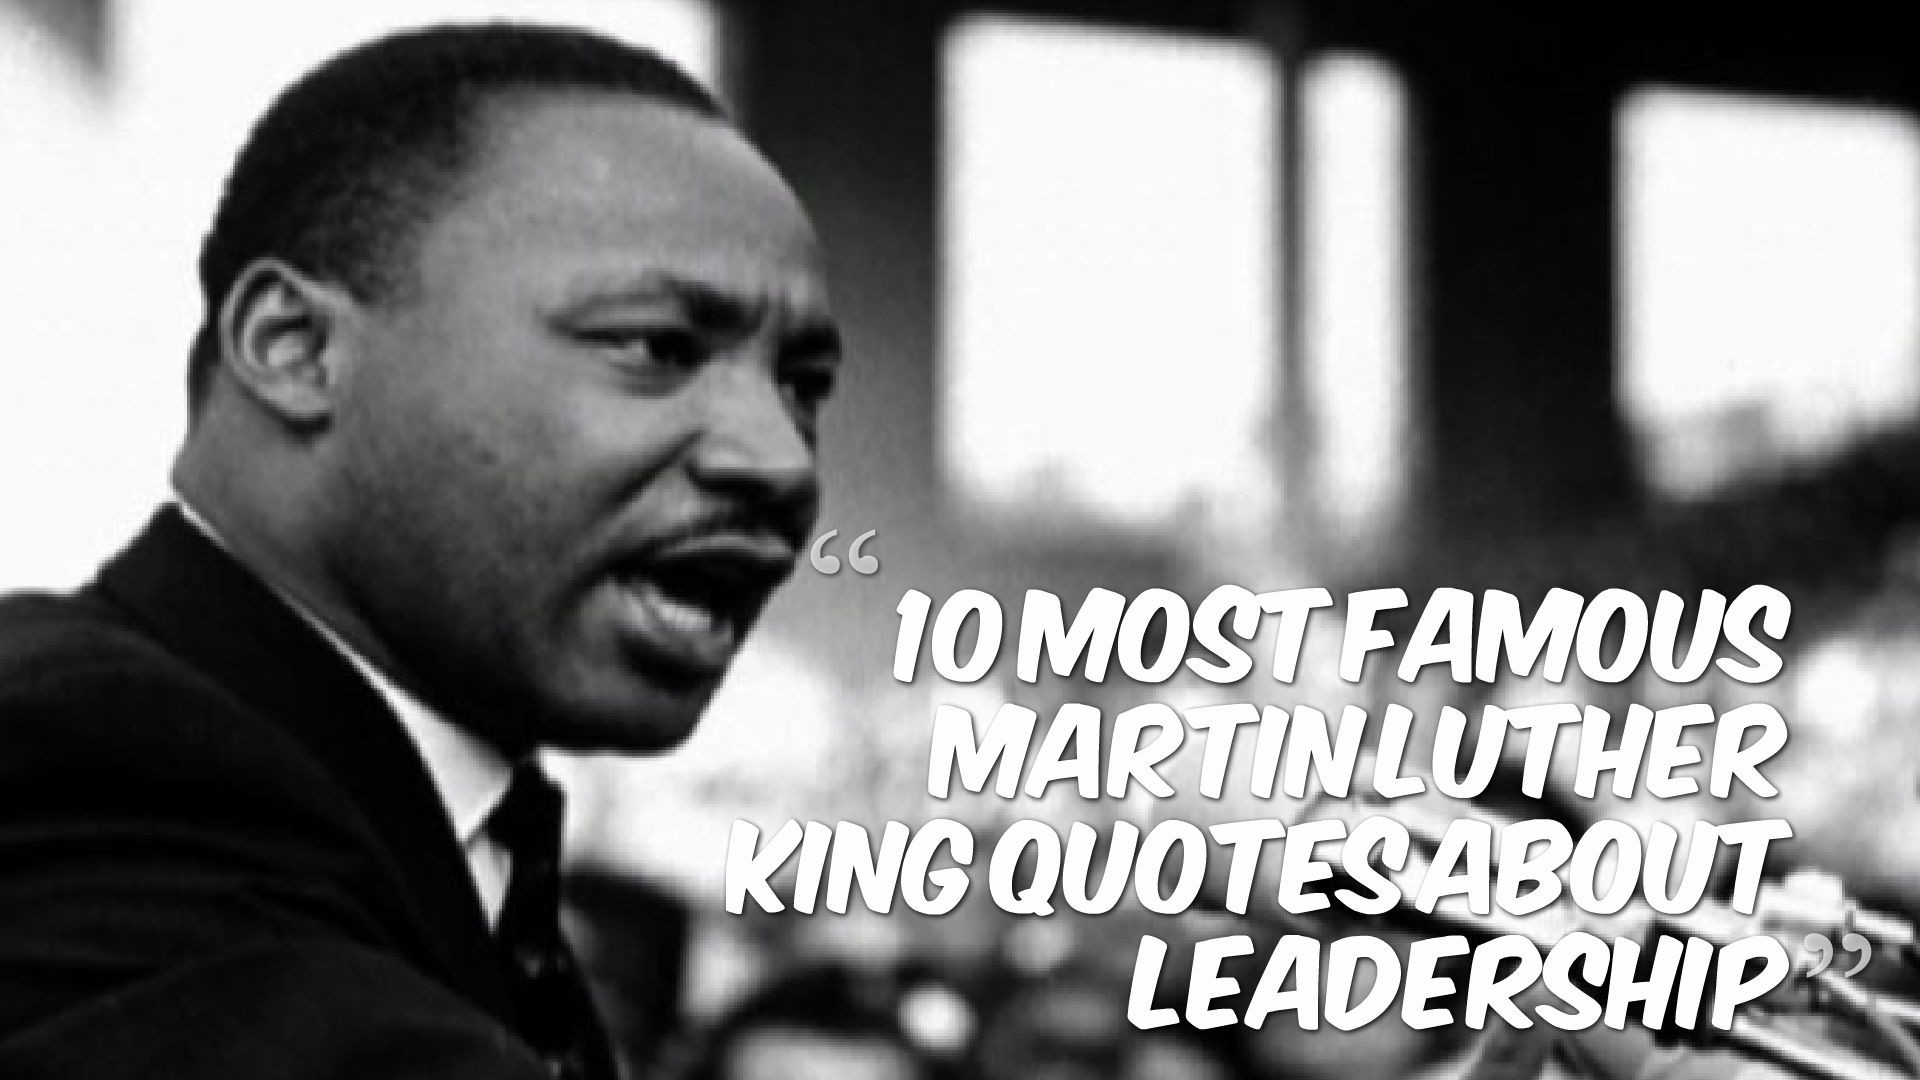 Mlk Quotes On Leadership
 Quotes about Leadership martin luther king 24 quotes